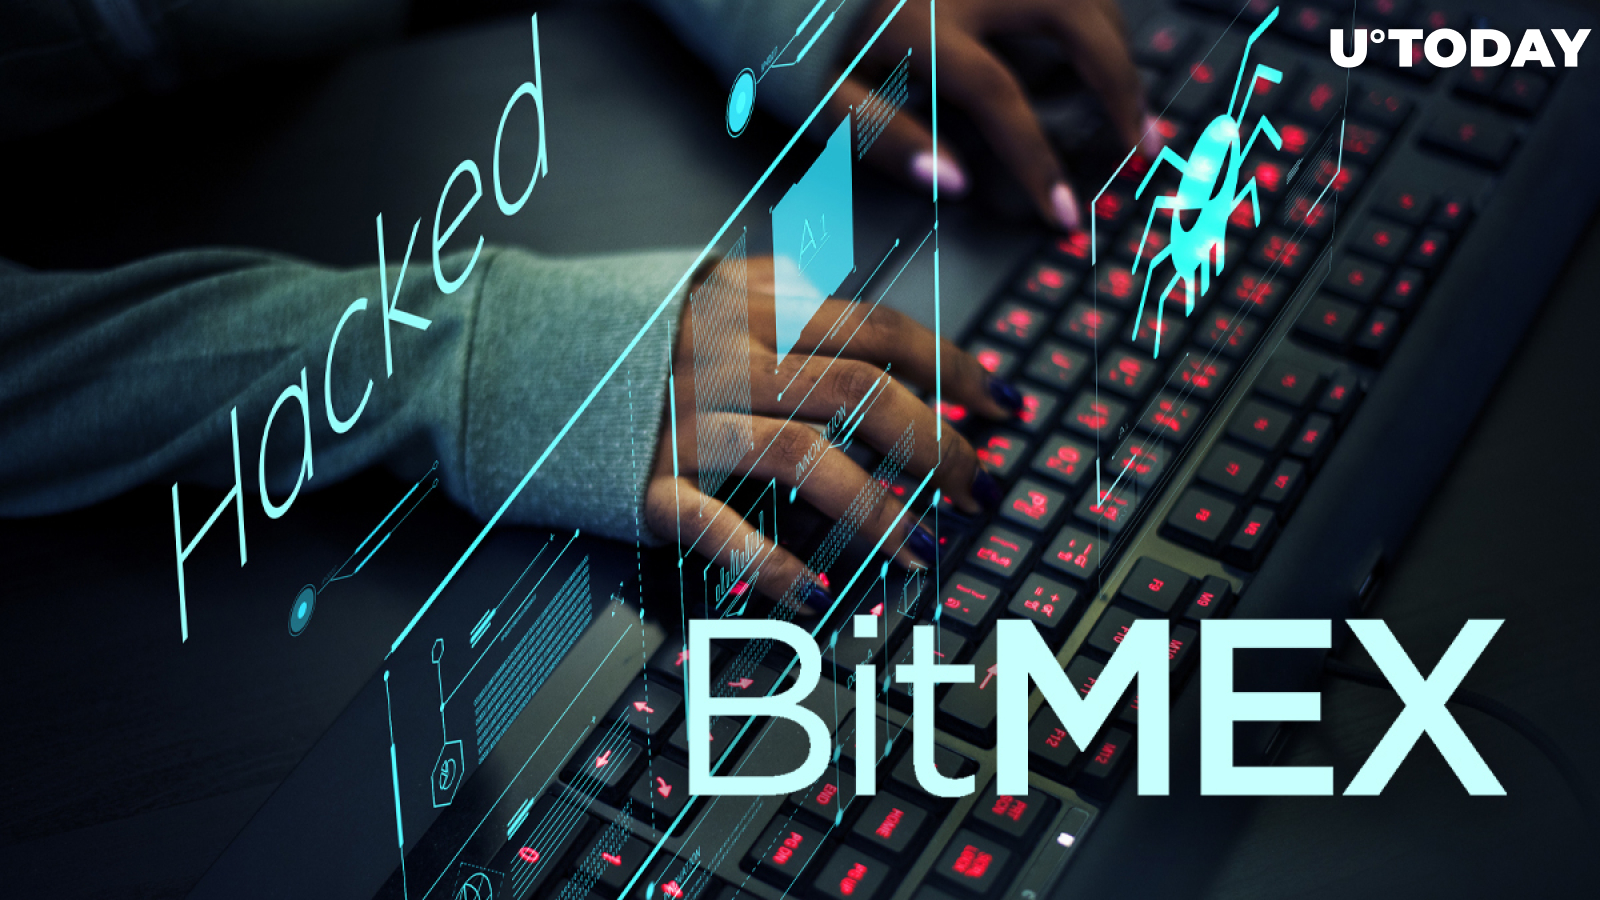 Update: BitMEX Reassures Its Users That All Funds Are Safe, Claims Trolls Targeted Its Twitter Account